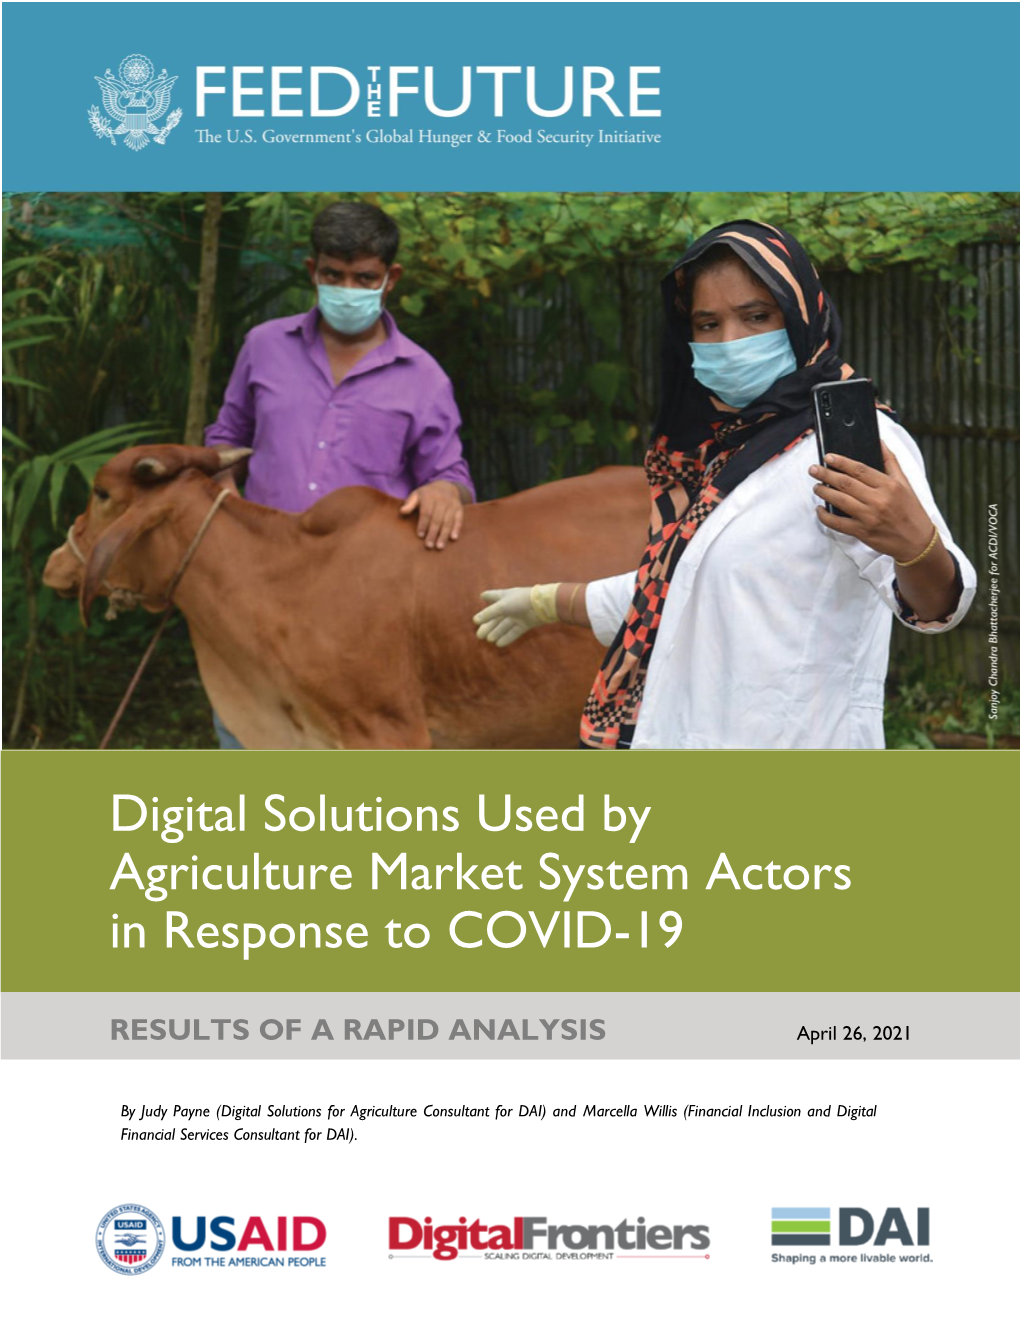 Digital Solutions Used by Agriculture Market System Actors in Response to COVID-19